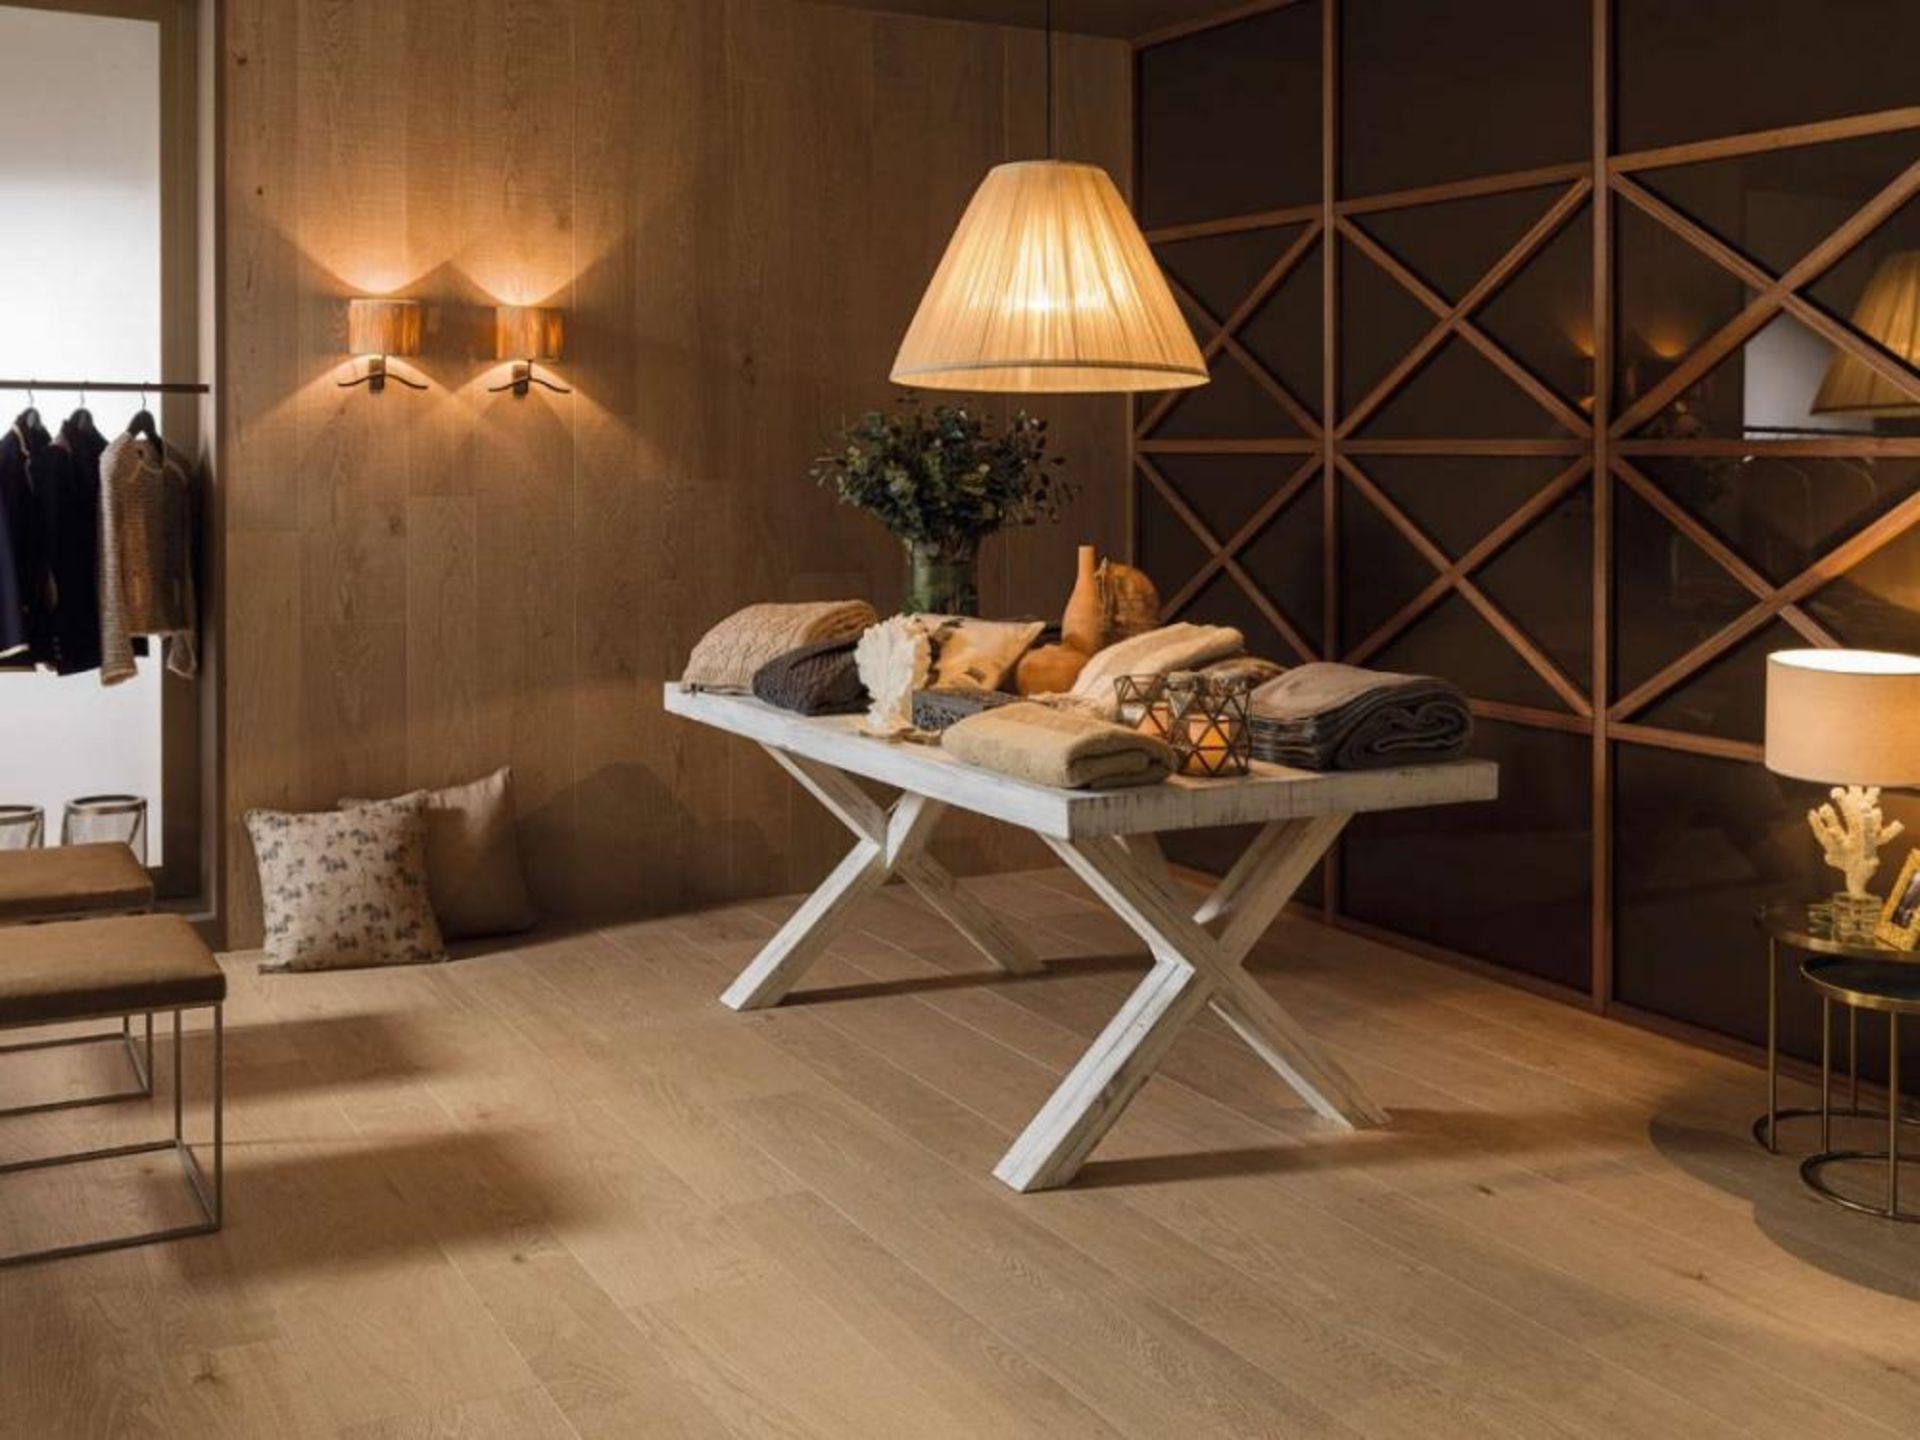 NEW 9.56m2 LAMINATE FLOORING TREND NATURE OAK. With a warm natural tone and a complex grain